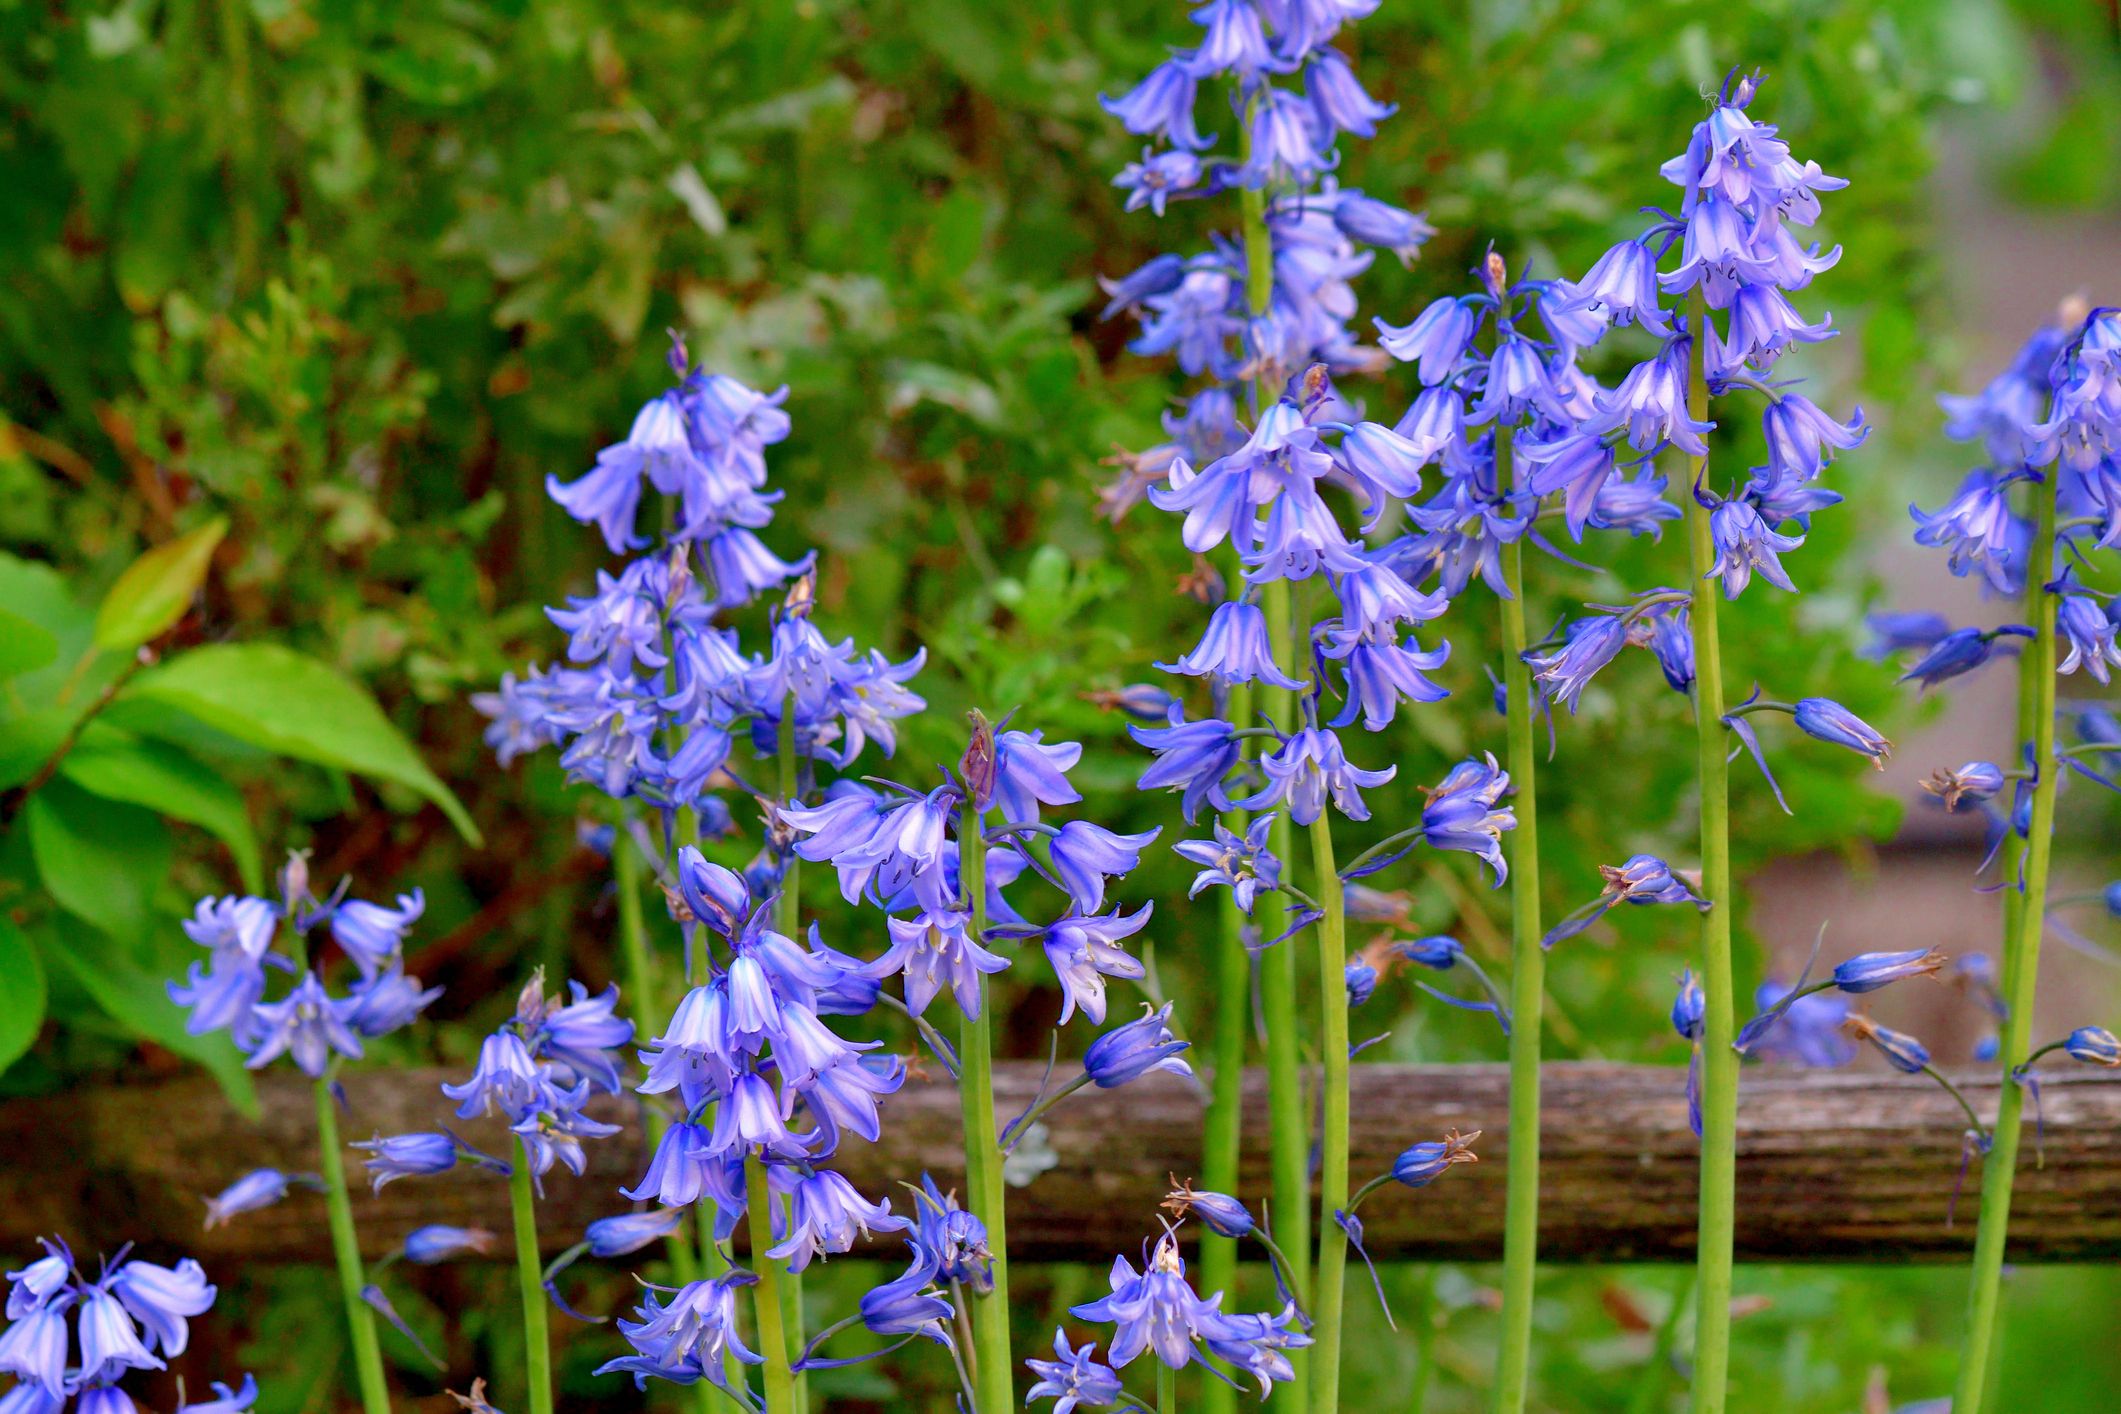 Spanish Bluebells, Save up to 75%